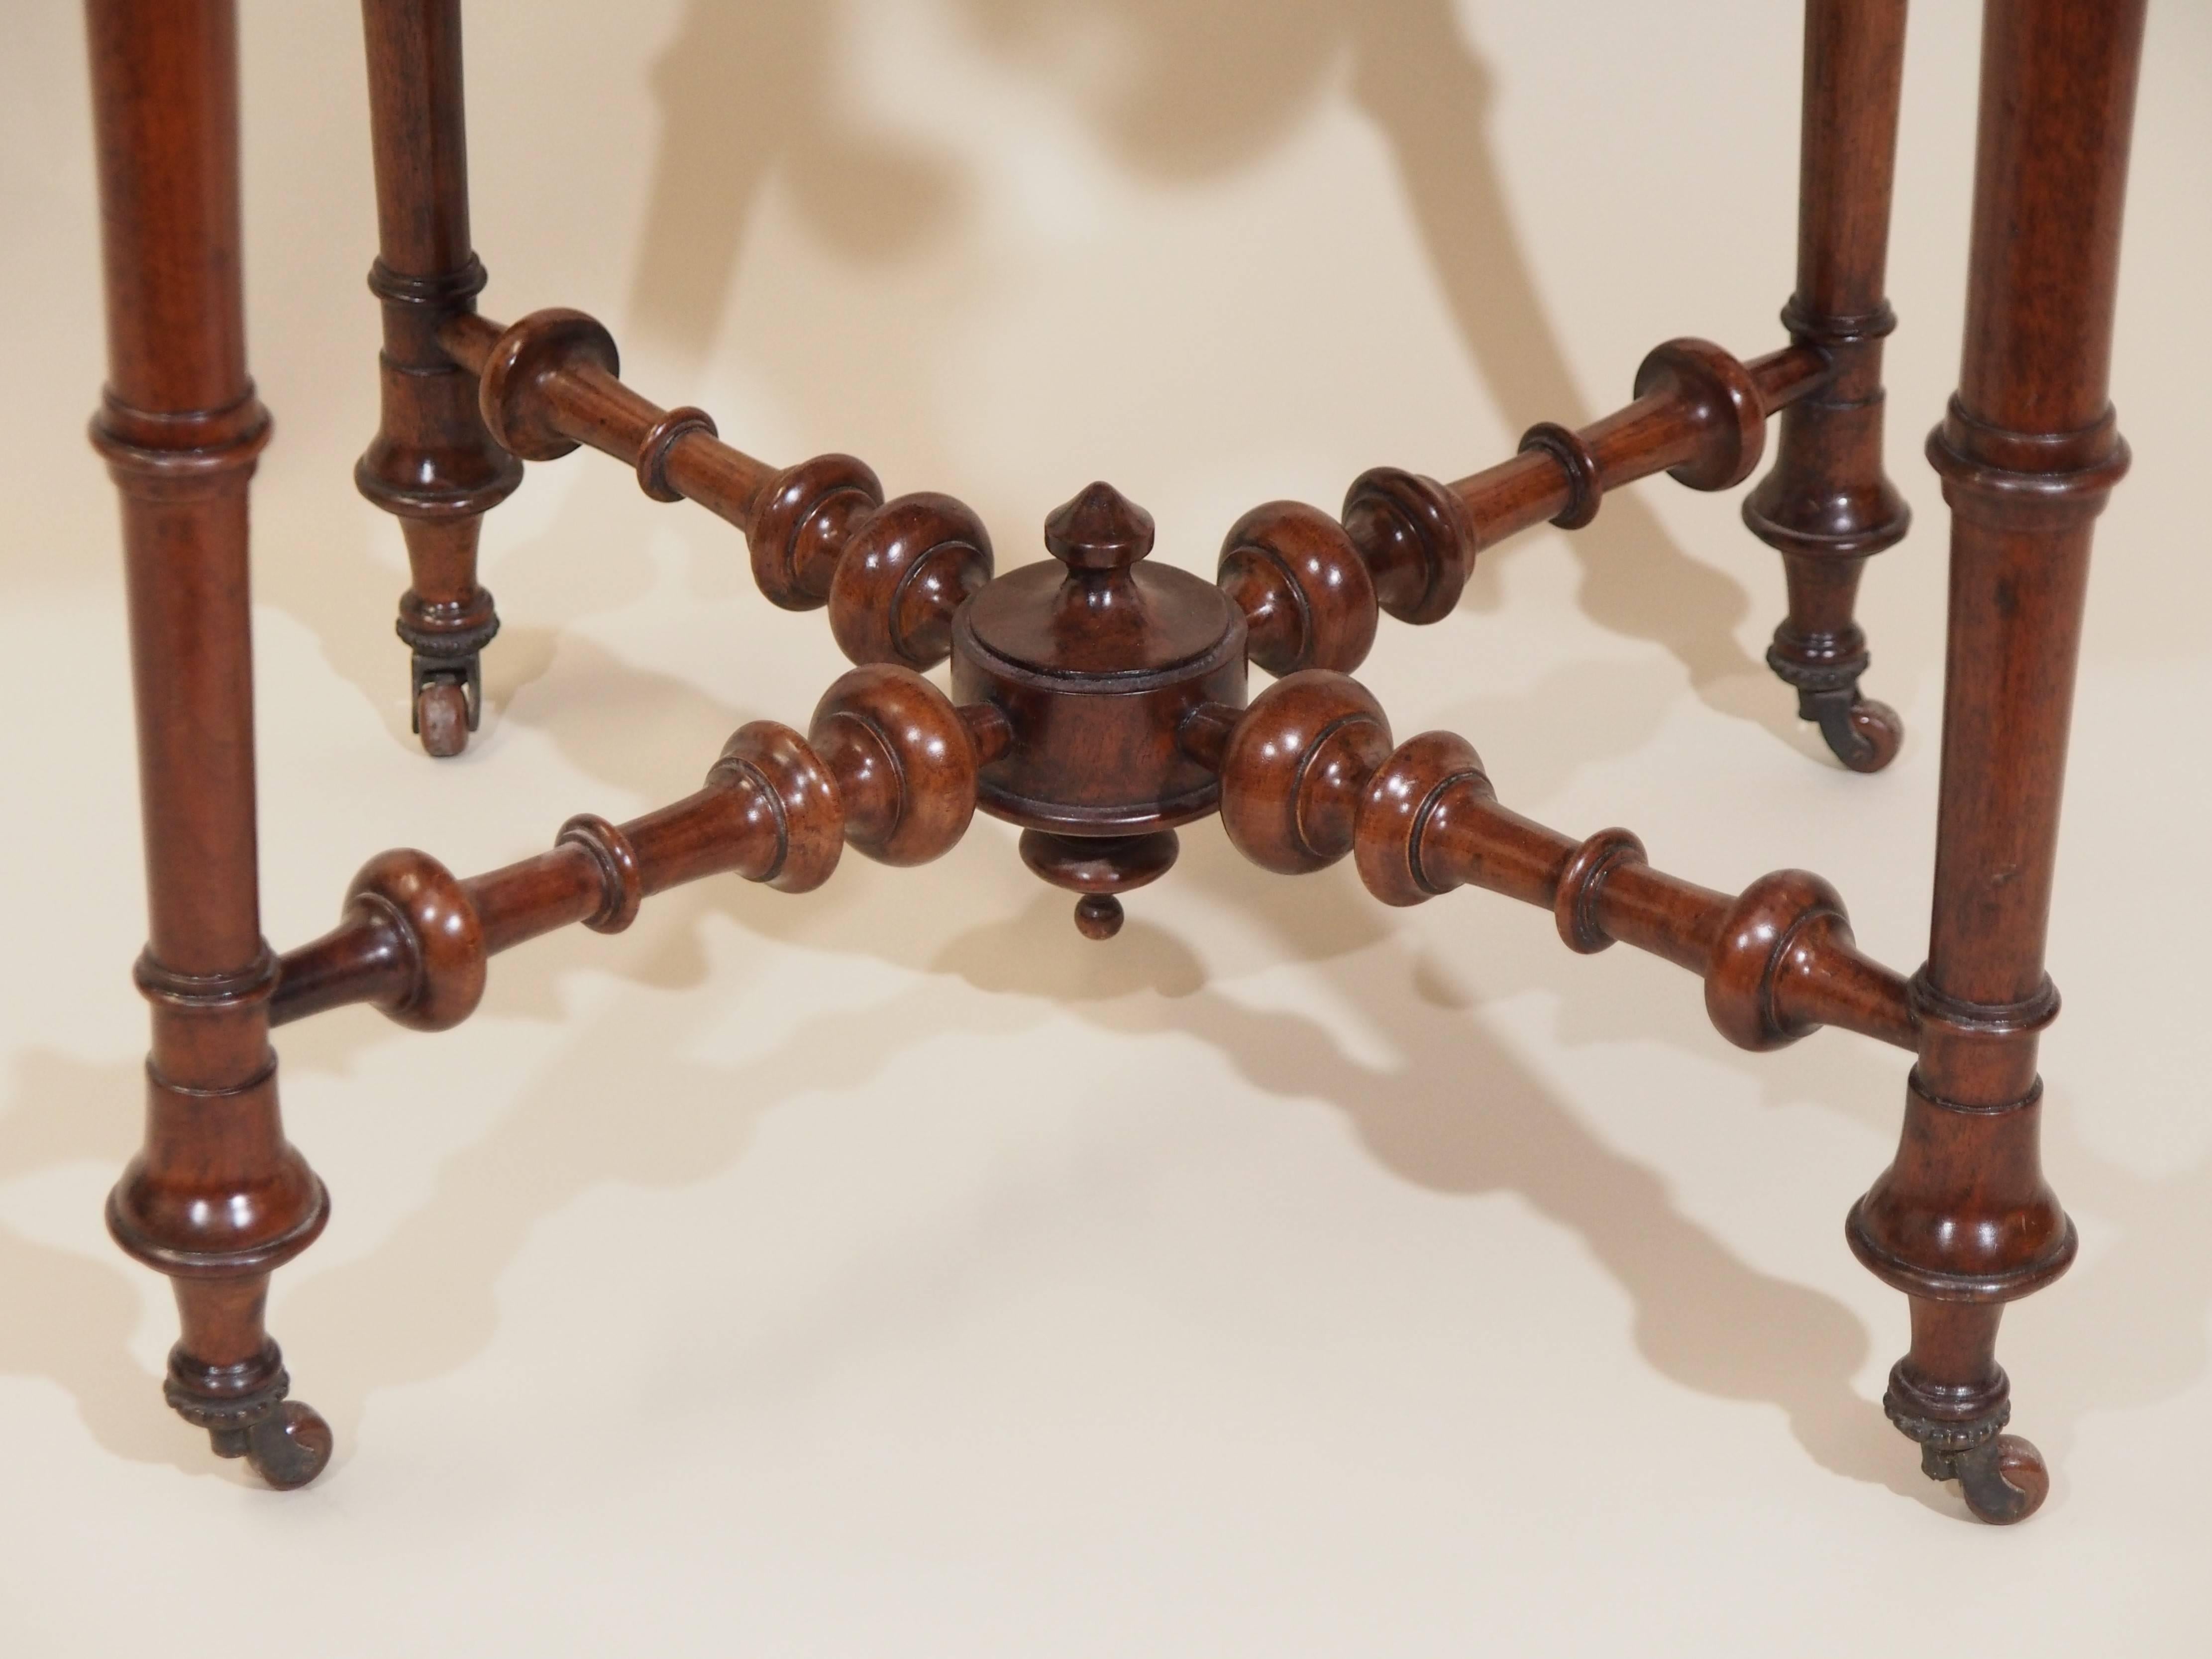 Antique English Burled Walnut Folding Card Table, circa 1880 In Good Condition For Sale In New Orleans, LA